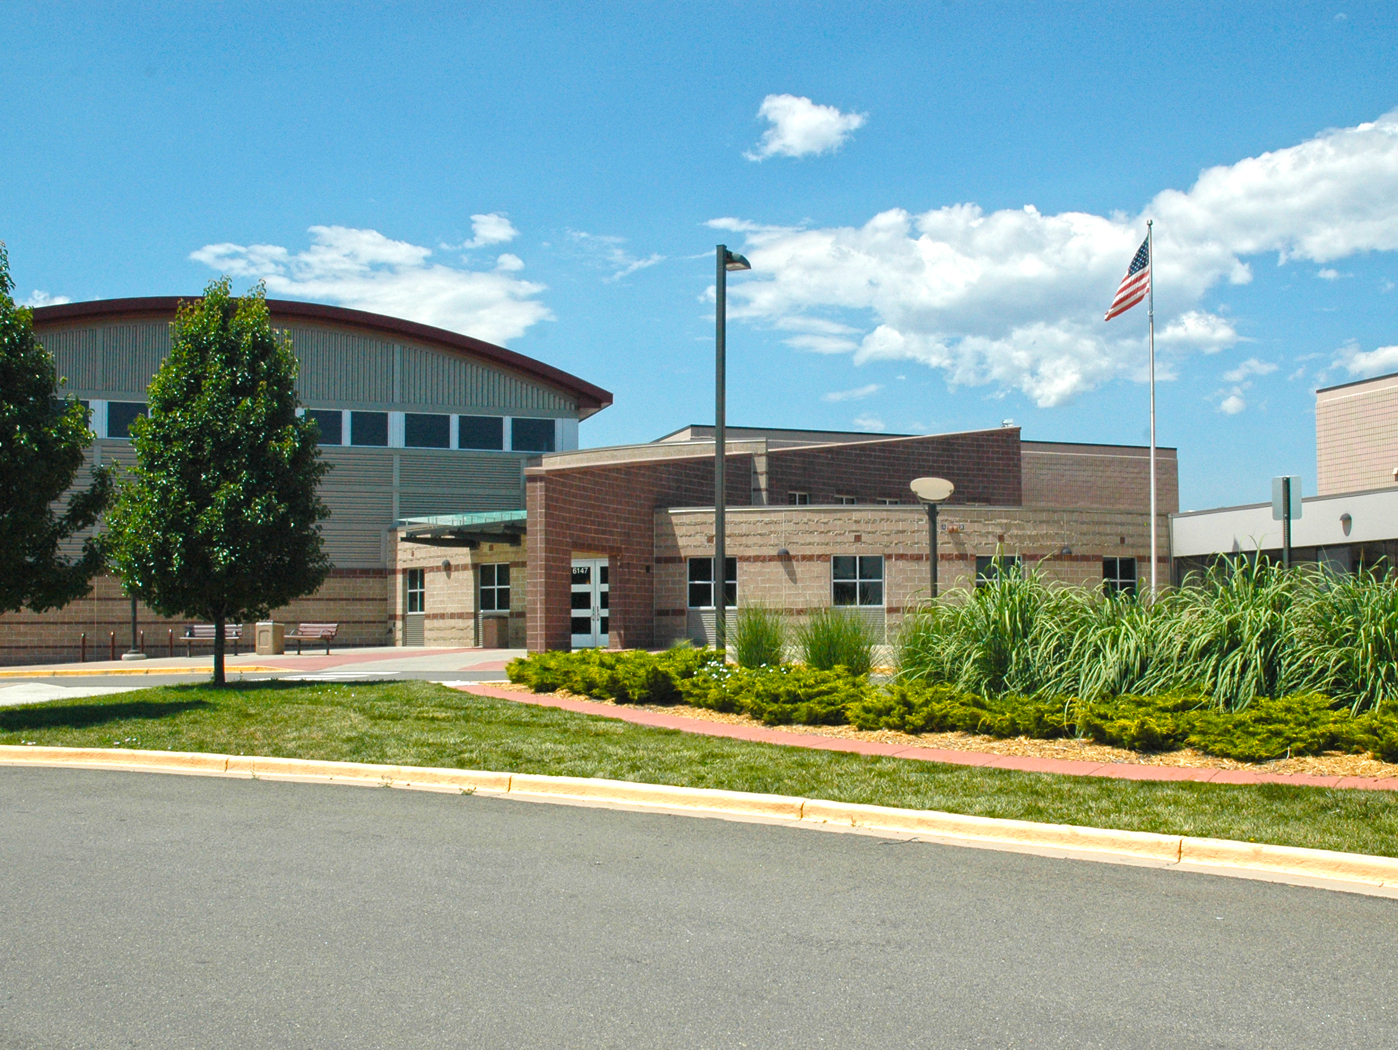 Image of the Lilley Gulch Recreation Center building.